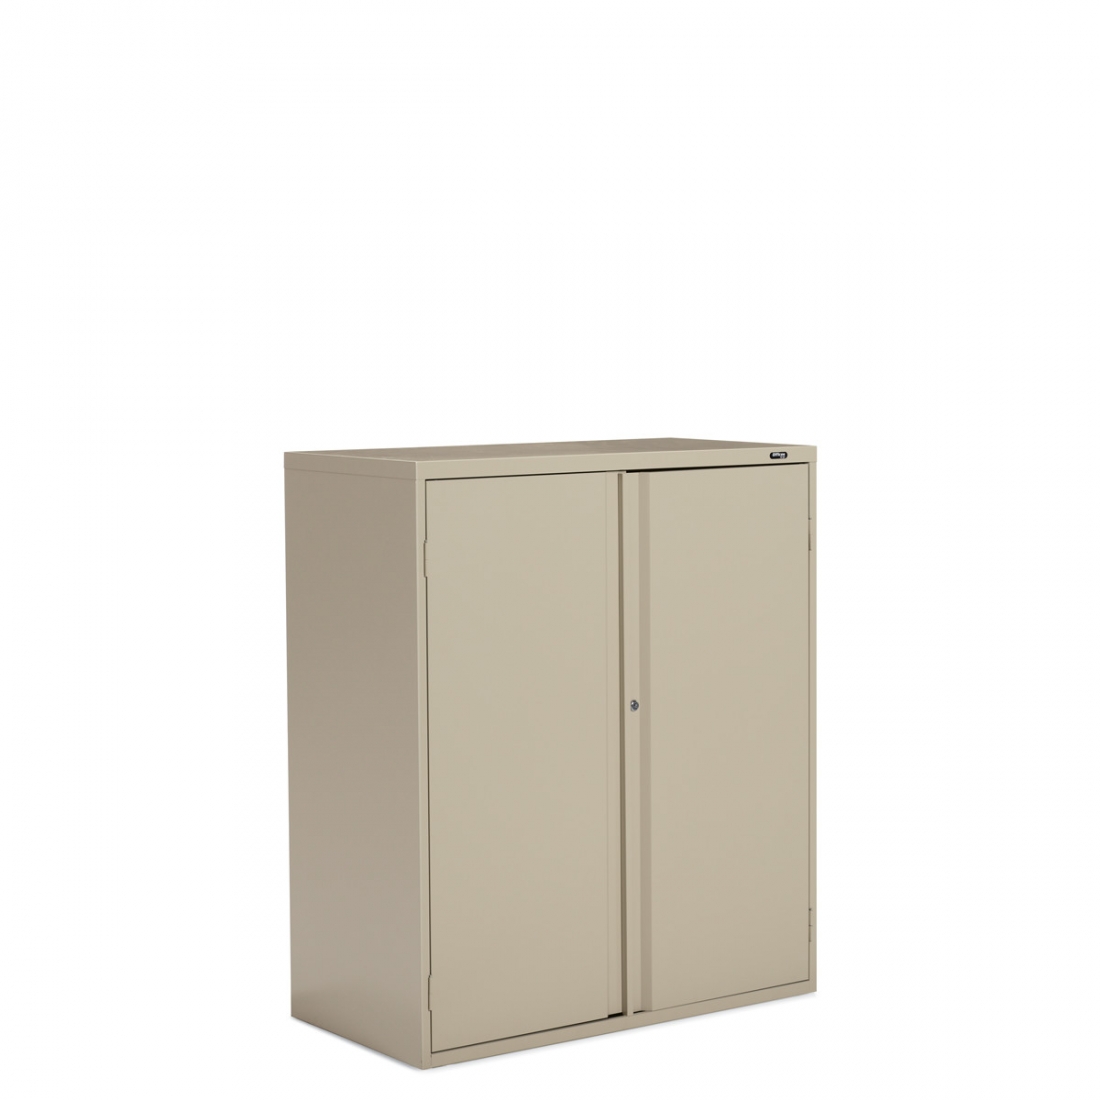 42" High Recessed Angled Full Pull Storage Cabinet